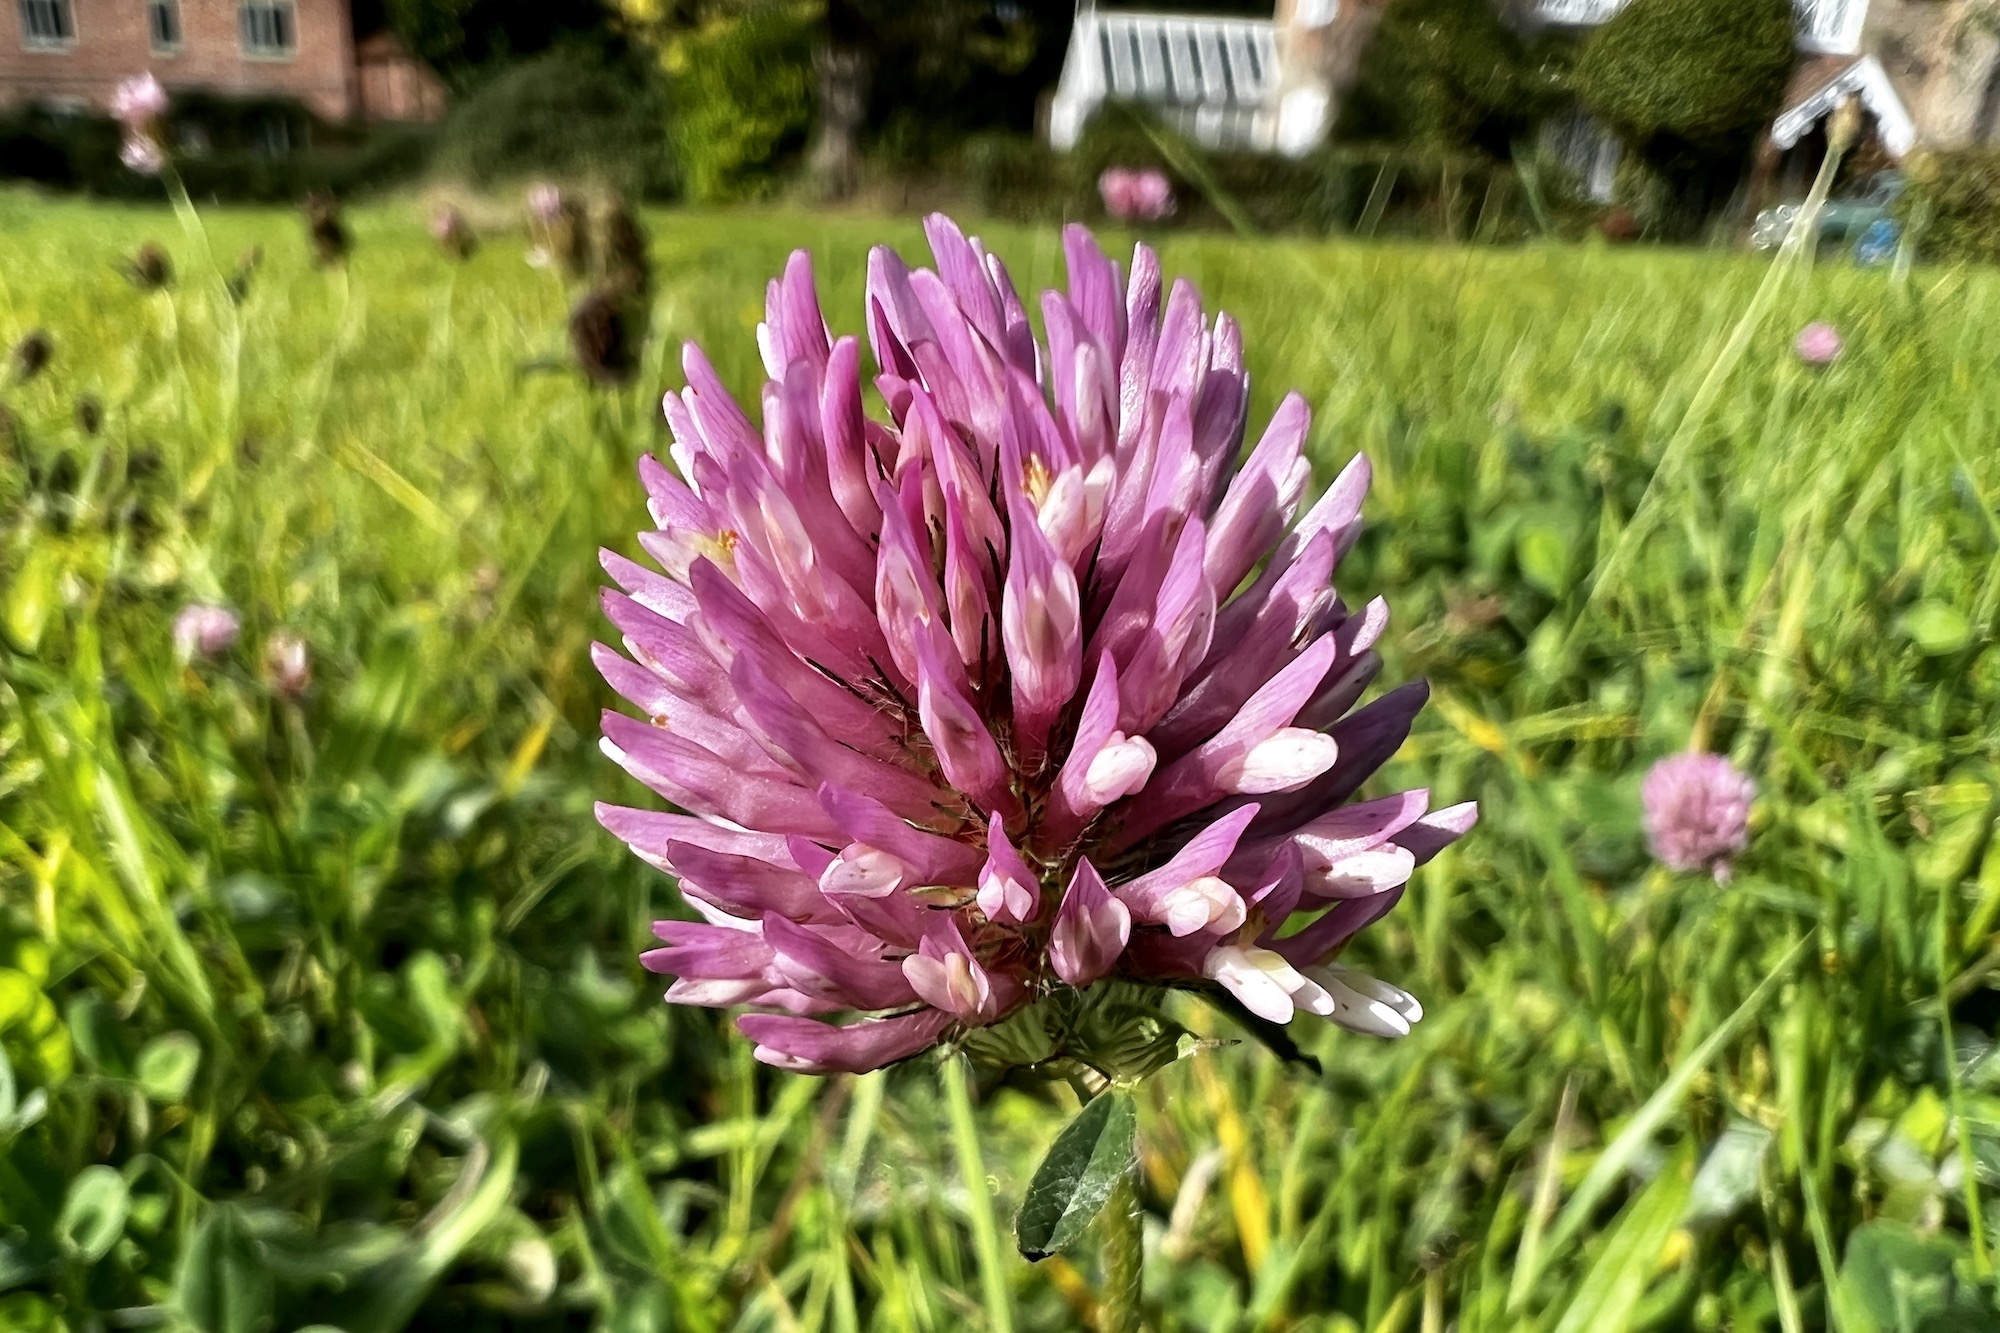 Macro photo of a flower taken with the iPhone 13 Pro.